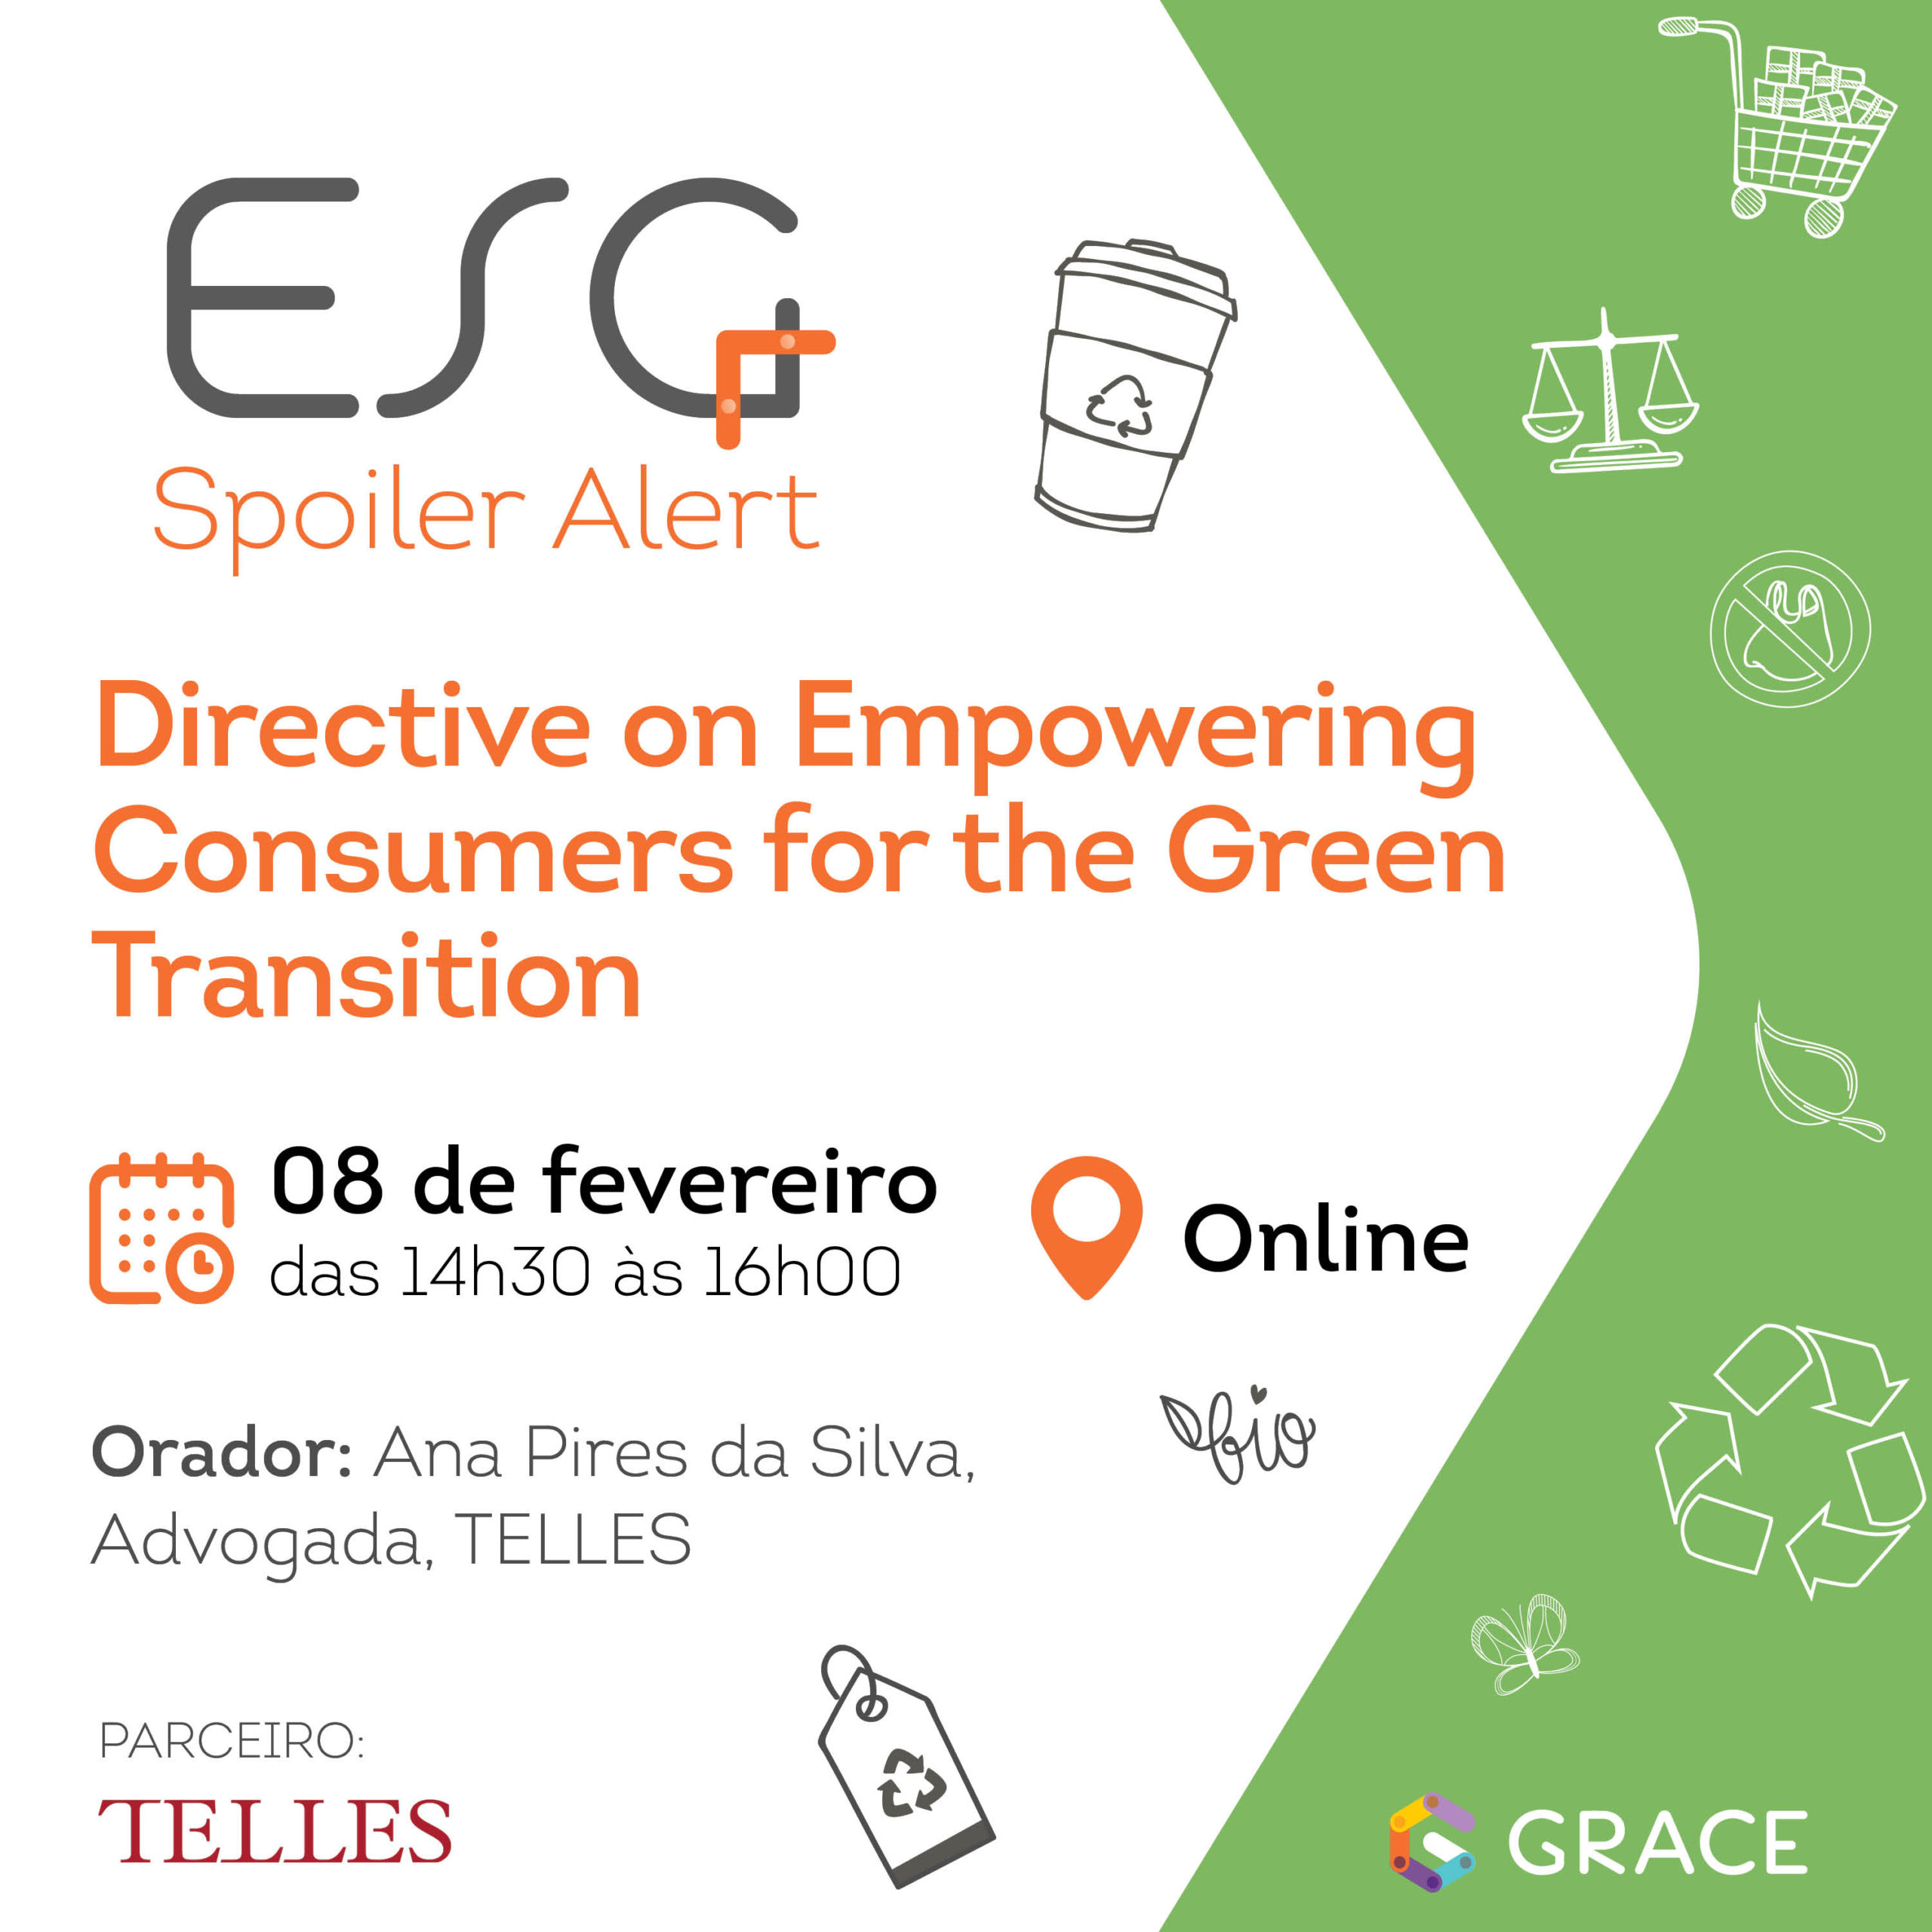 ESG Spoiler Alert | Directive on Empowering Consumers for the Green Transition